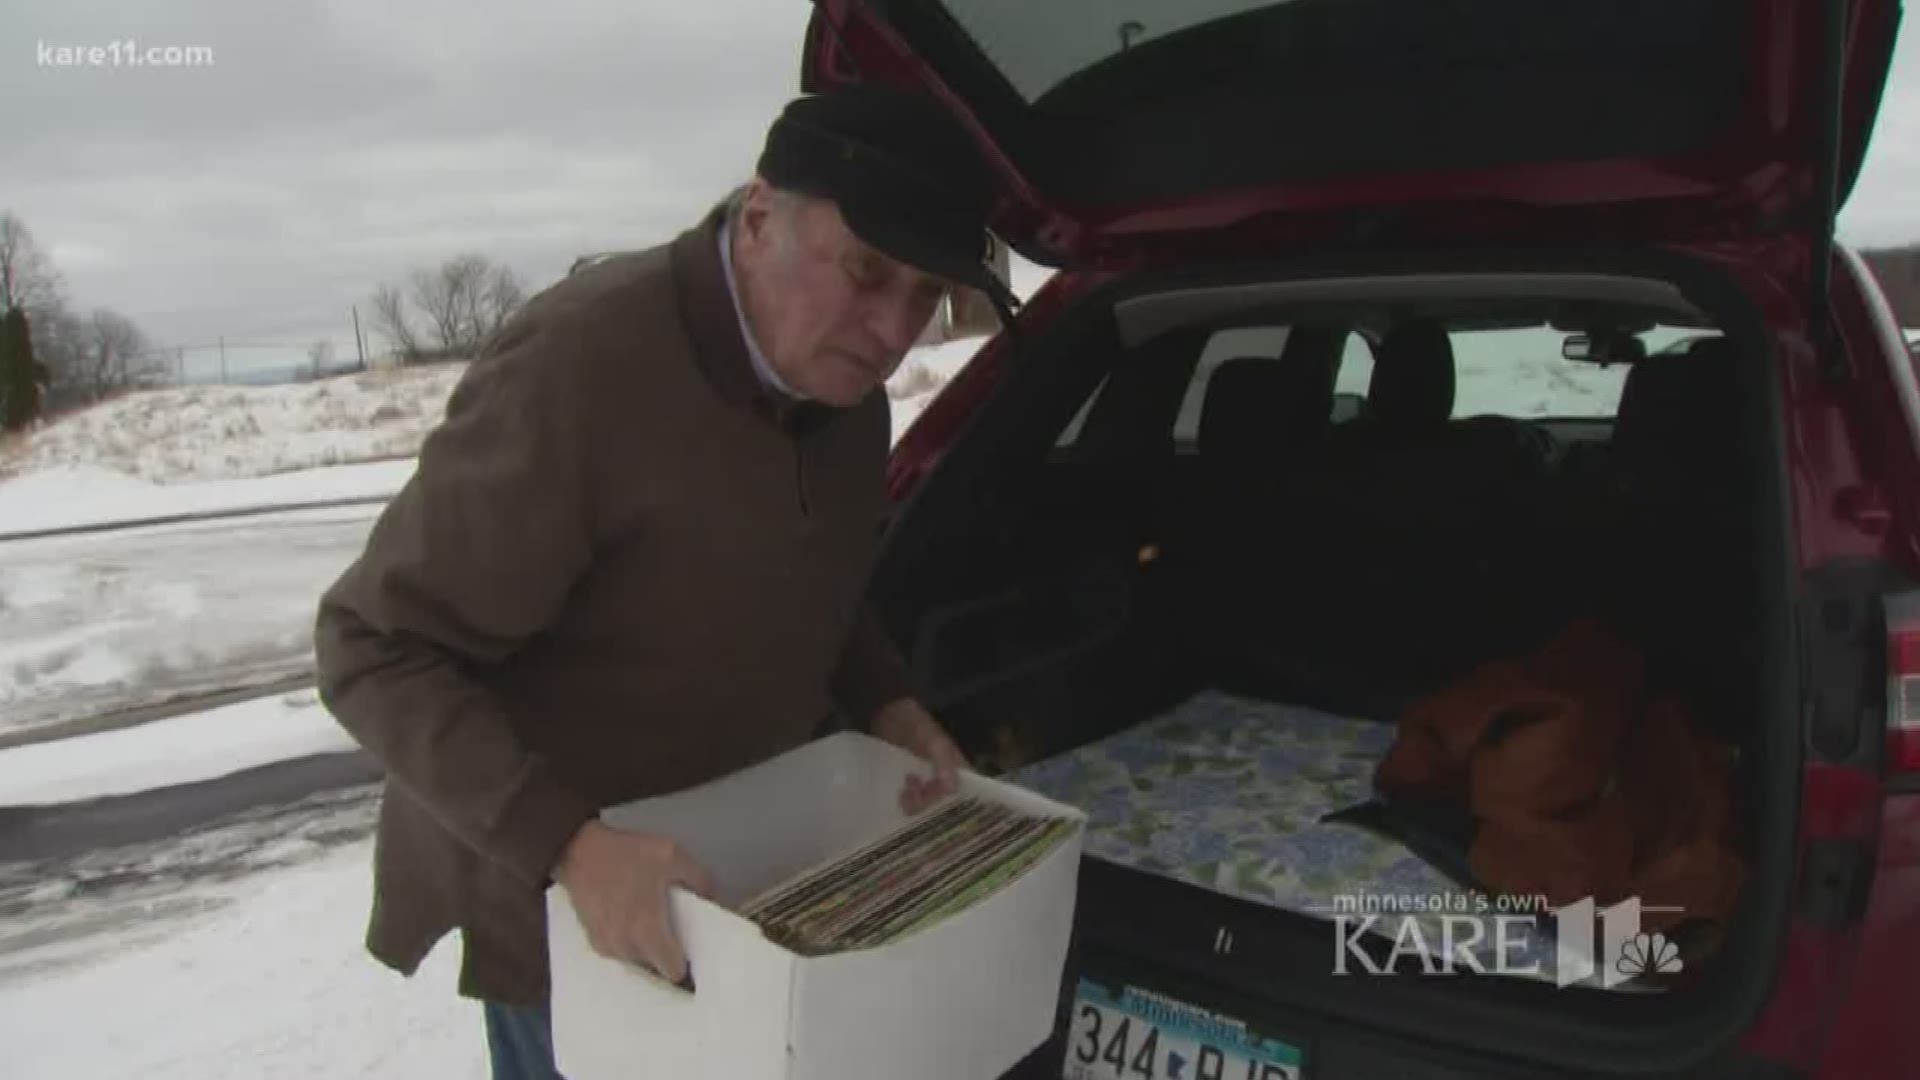 Bob Knutson has donated more than 40 turntables to senior communities. Each month he stops by with another batch of records. https://kare11.tv/2pFmZ7l